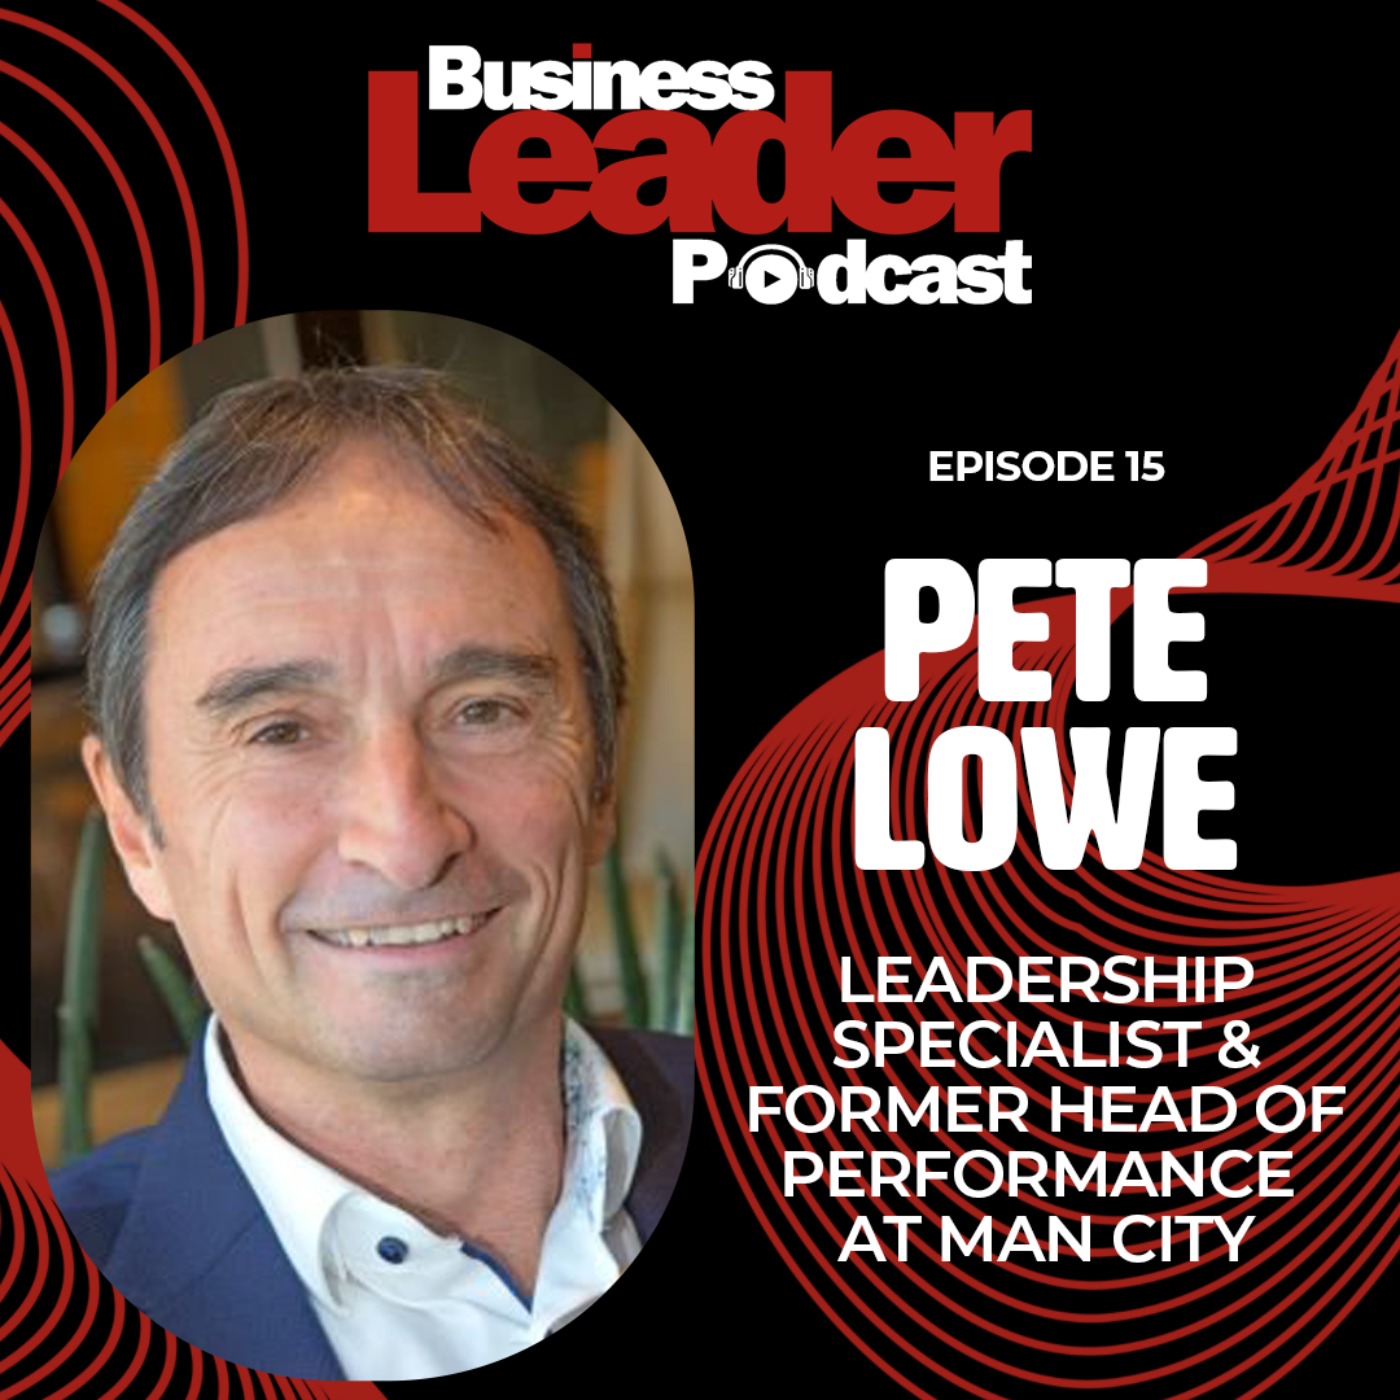 Pete Lowe: leadership specialist and former Head of Performance at Manchester City